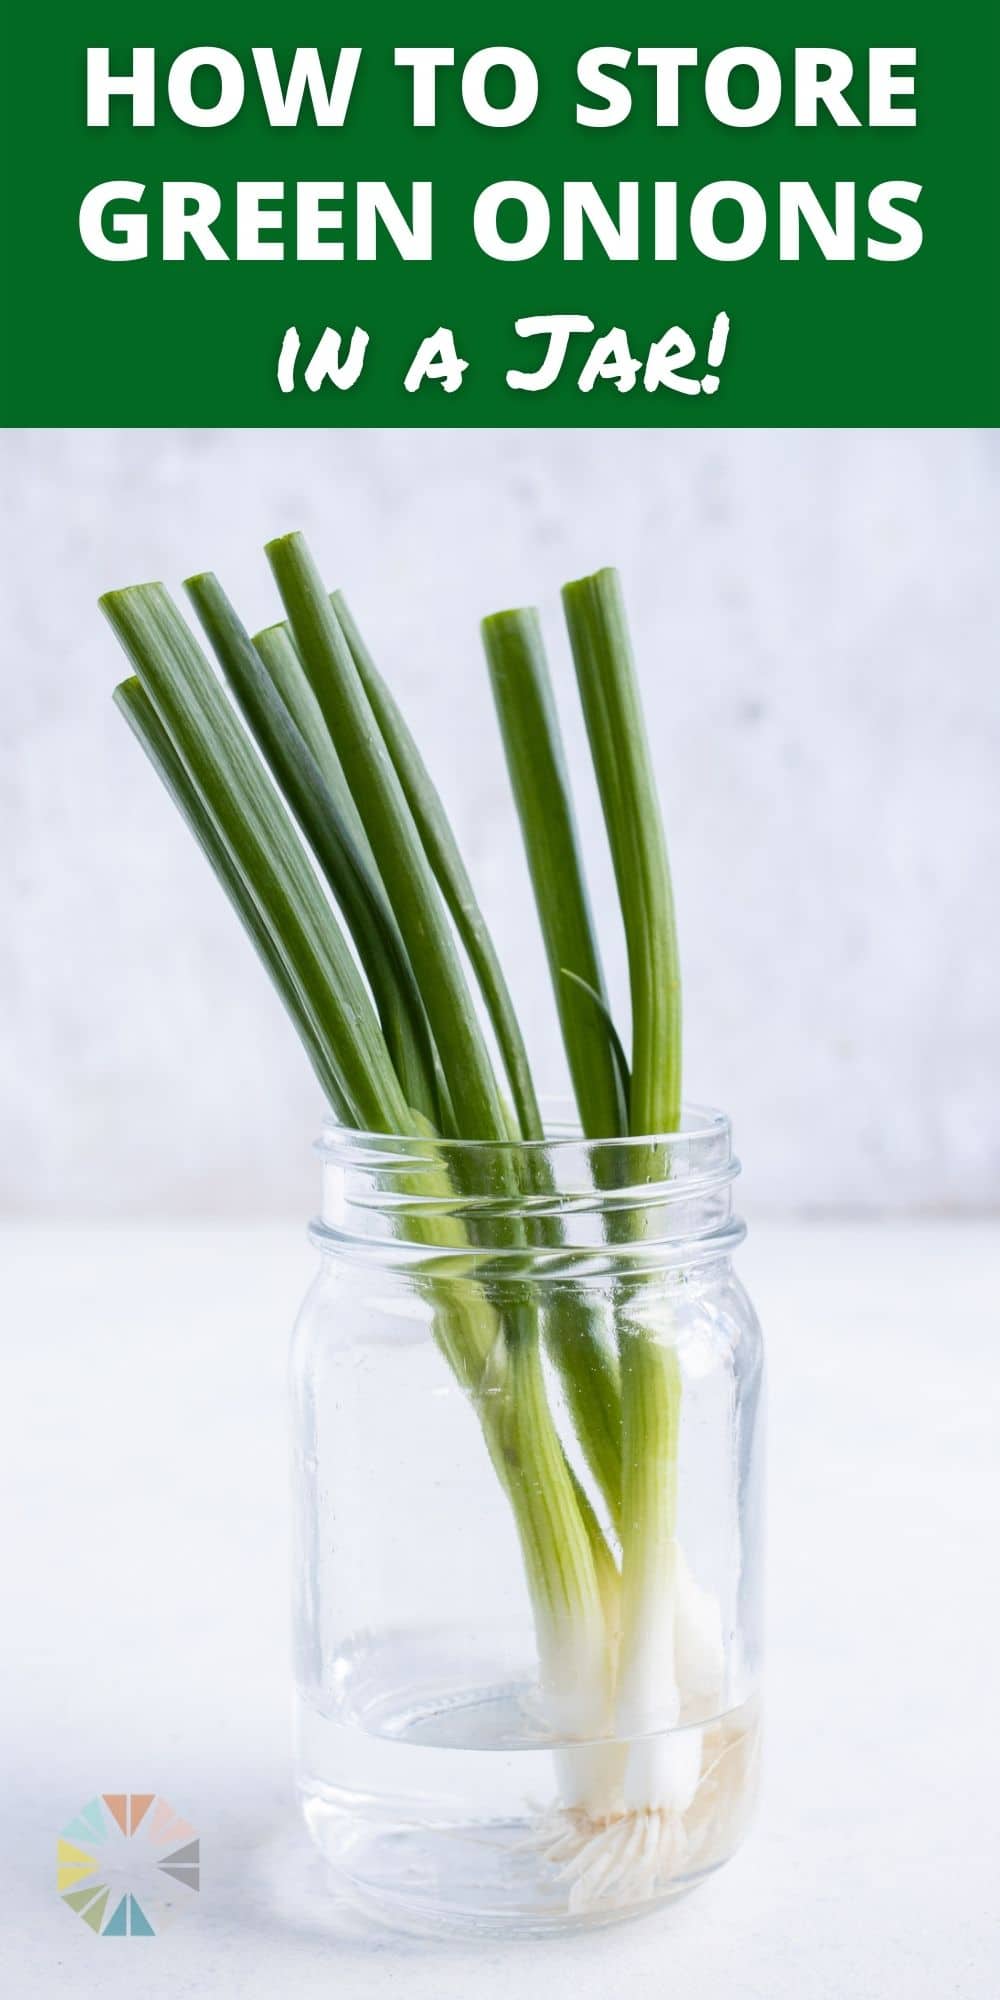 How To Store Green Onions Pinterest 22 1 B 